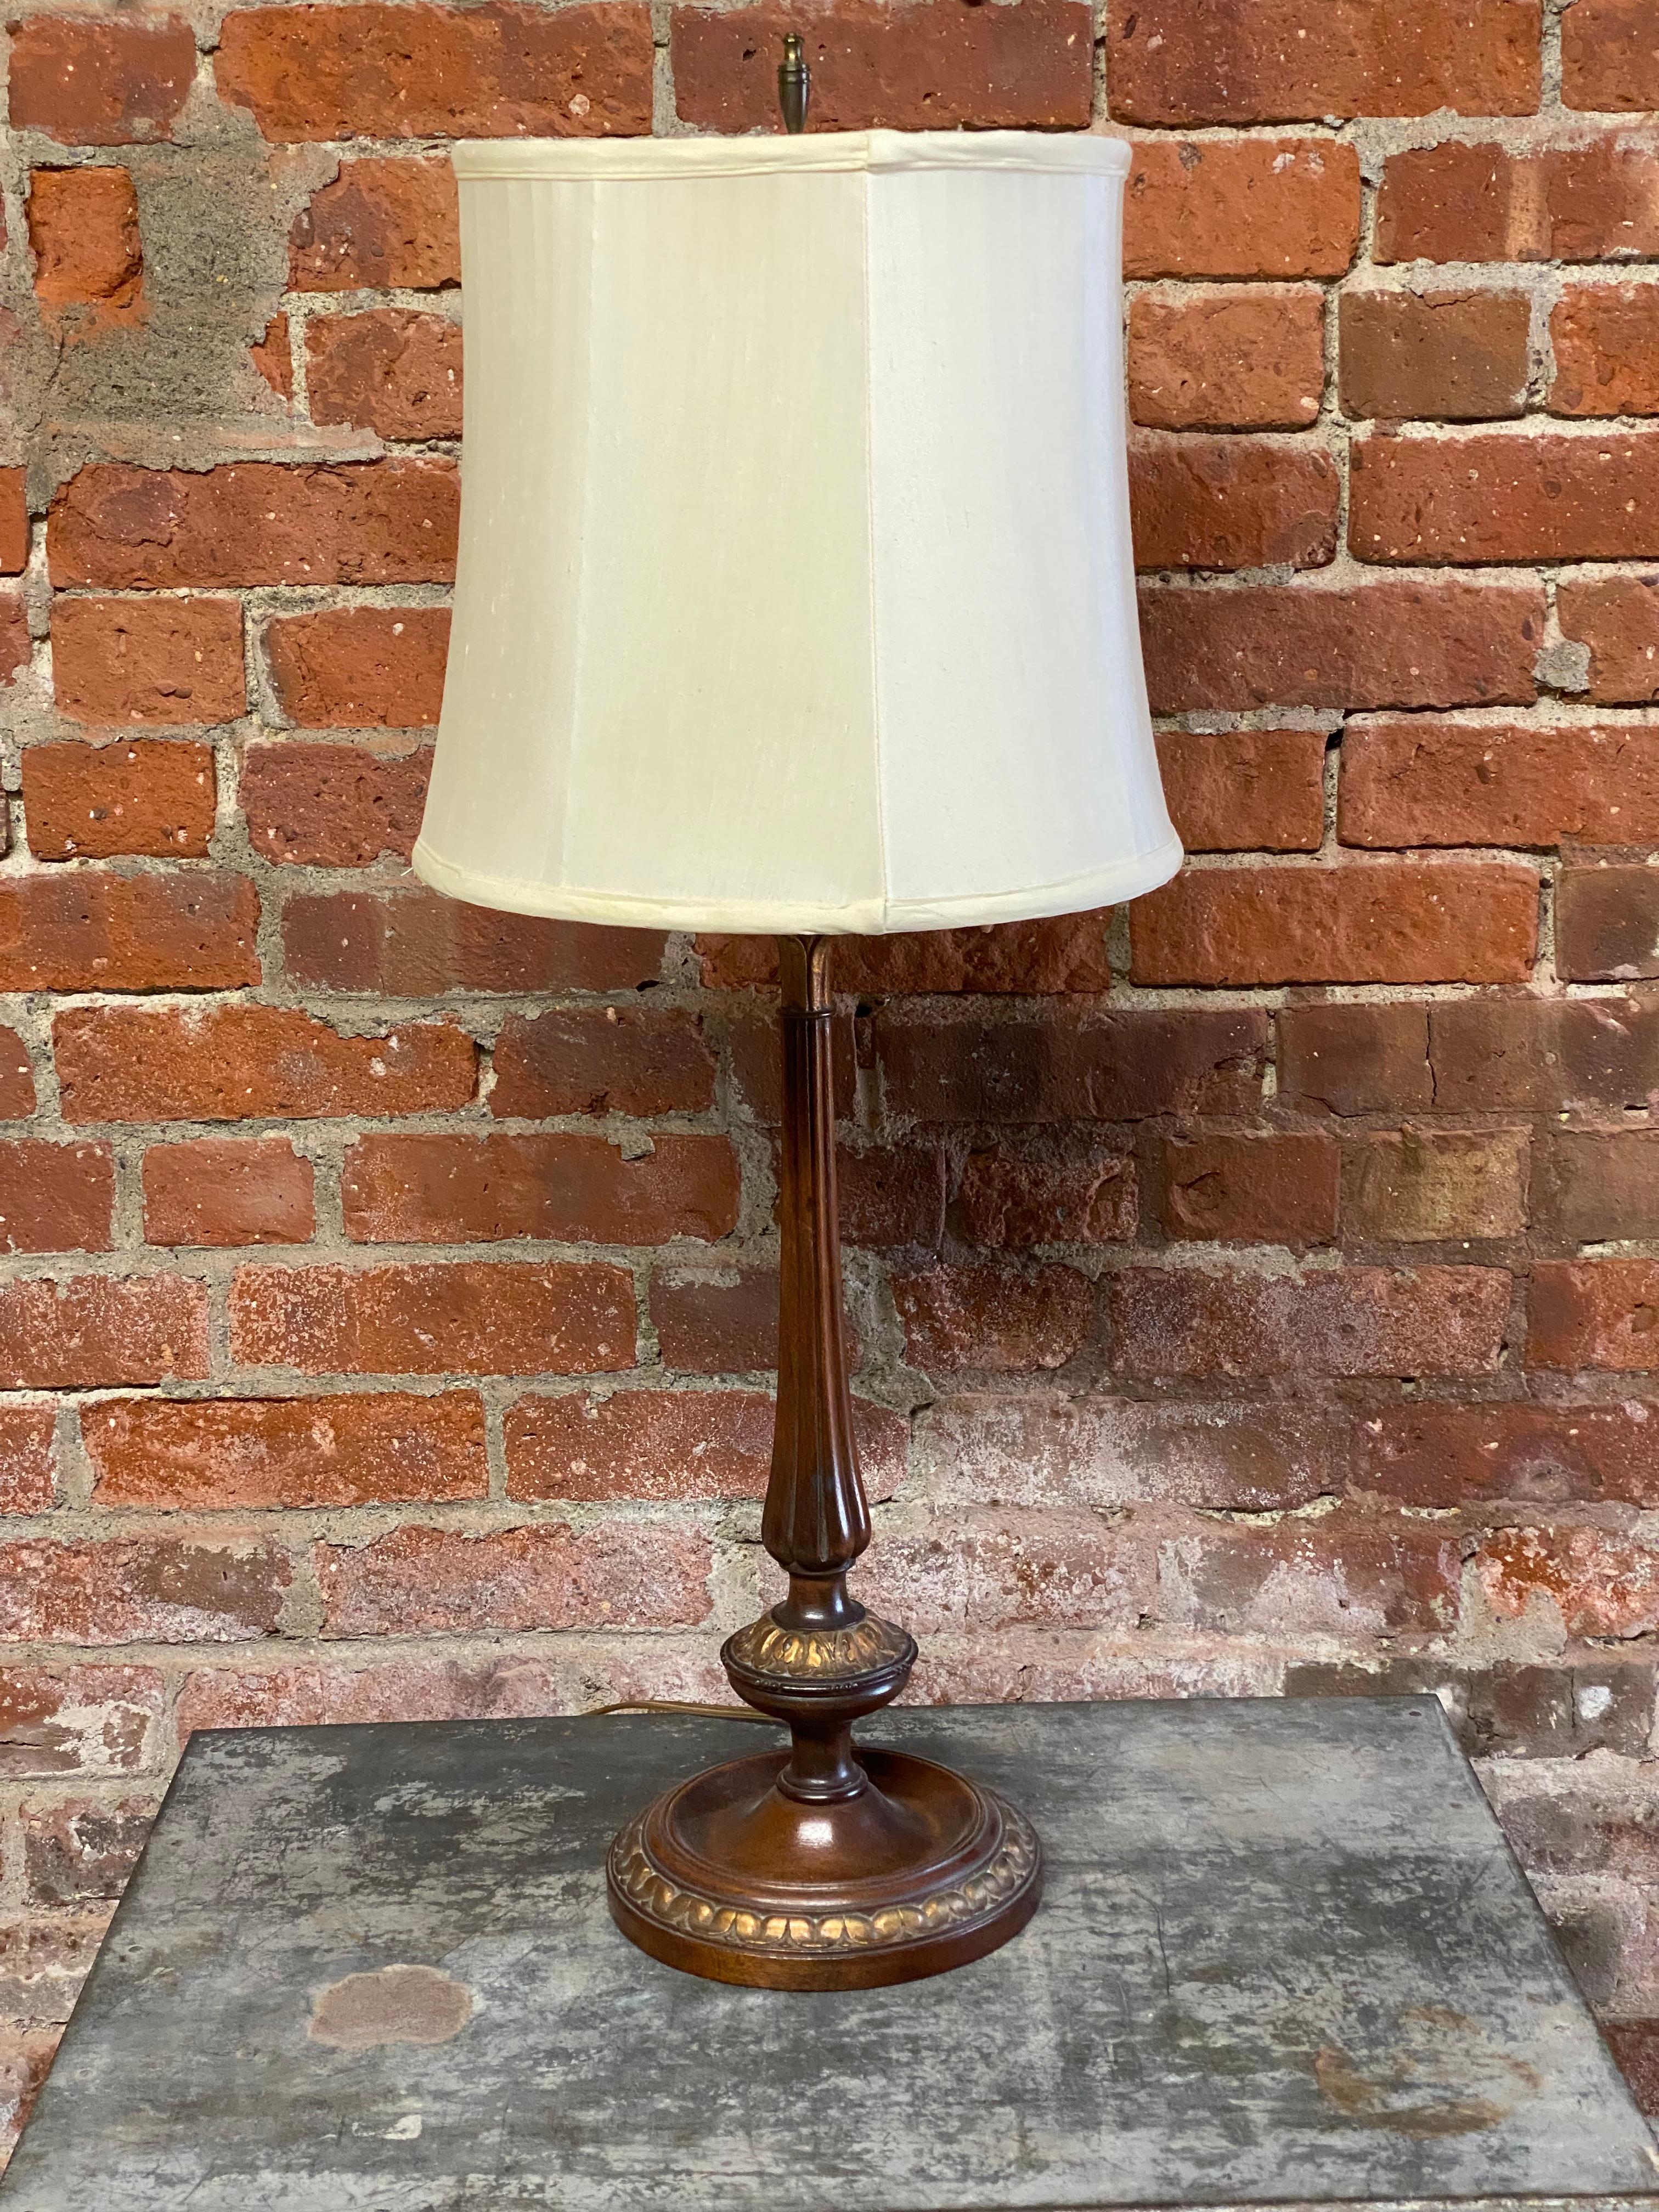 A gorgeous carved and parcel gilt walnut table lamp. Circa 1920-30. Purchased at Bloomingdale's, New York City by the original owner. This delicate beauty bares all the quality of fine furniture making and lighting being sold at some of New York's